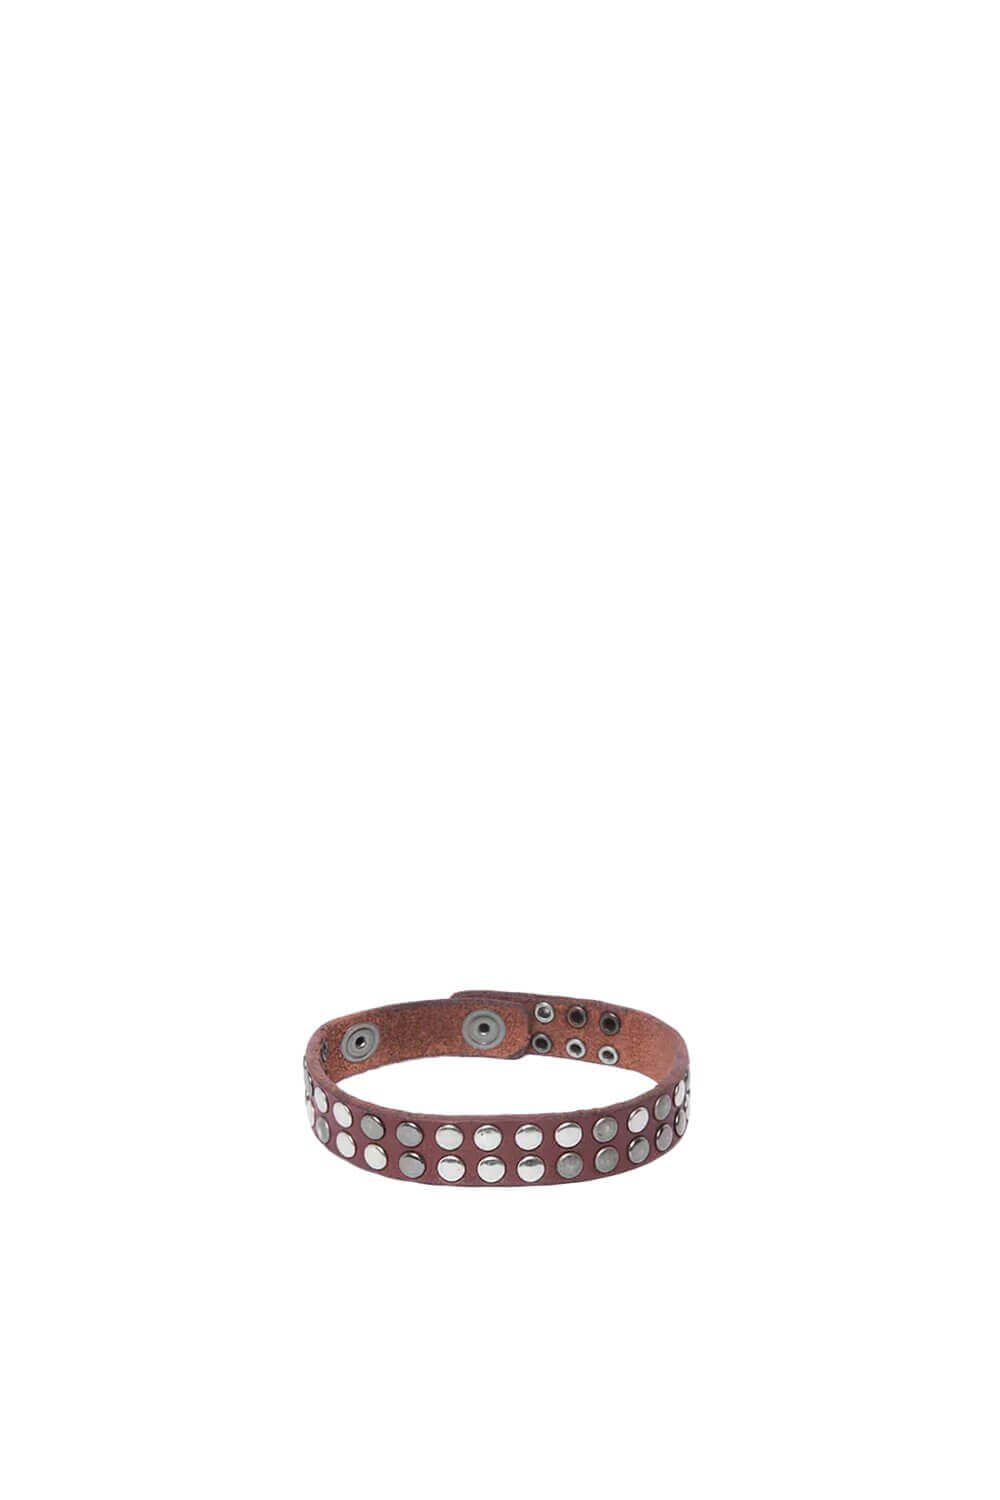 10.000 MINI BR Brown leather bracelet with double line studs, zamac button closure with carved HTC Los Angeles logo. 100% Made in Italy. HTC LOS ANGELES